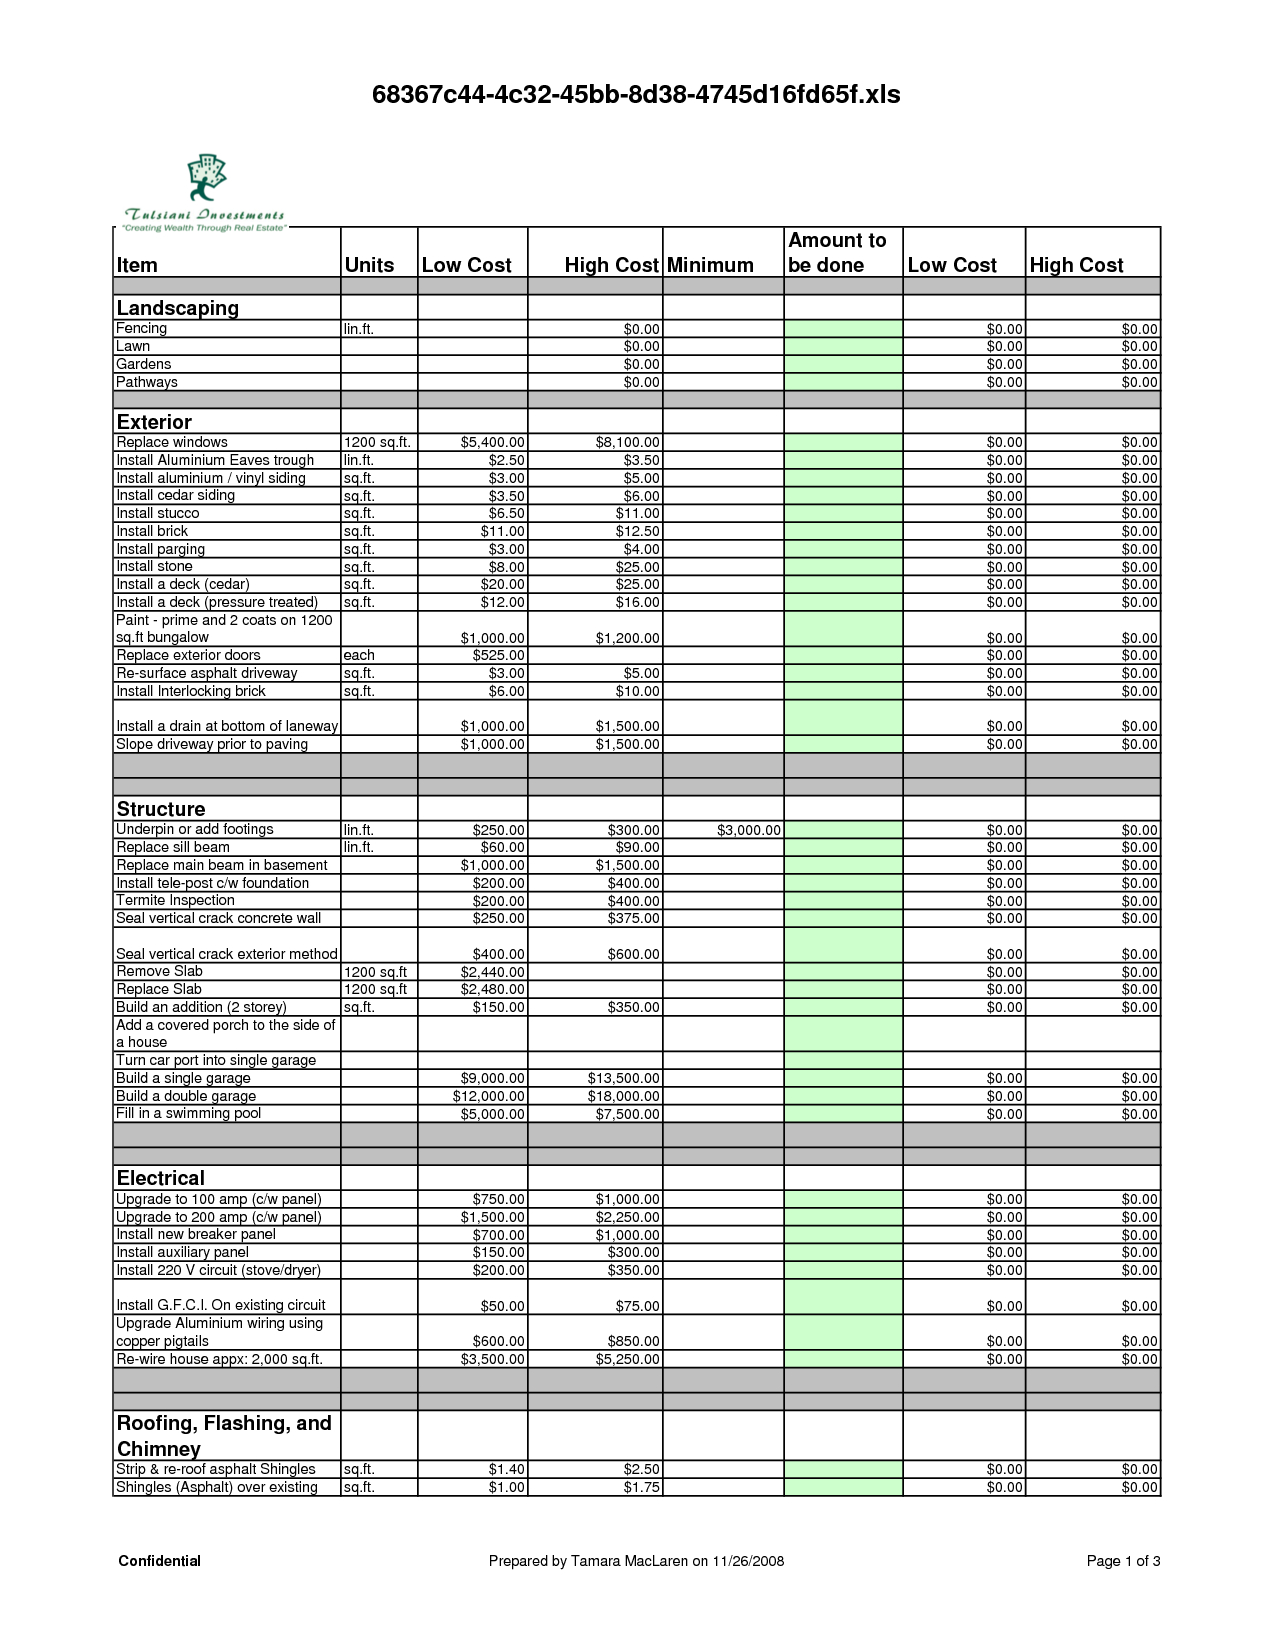 Construction Estimating Spreadsheet Free Download Residential Within Residential Cost Estimate Template